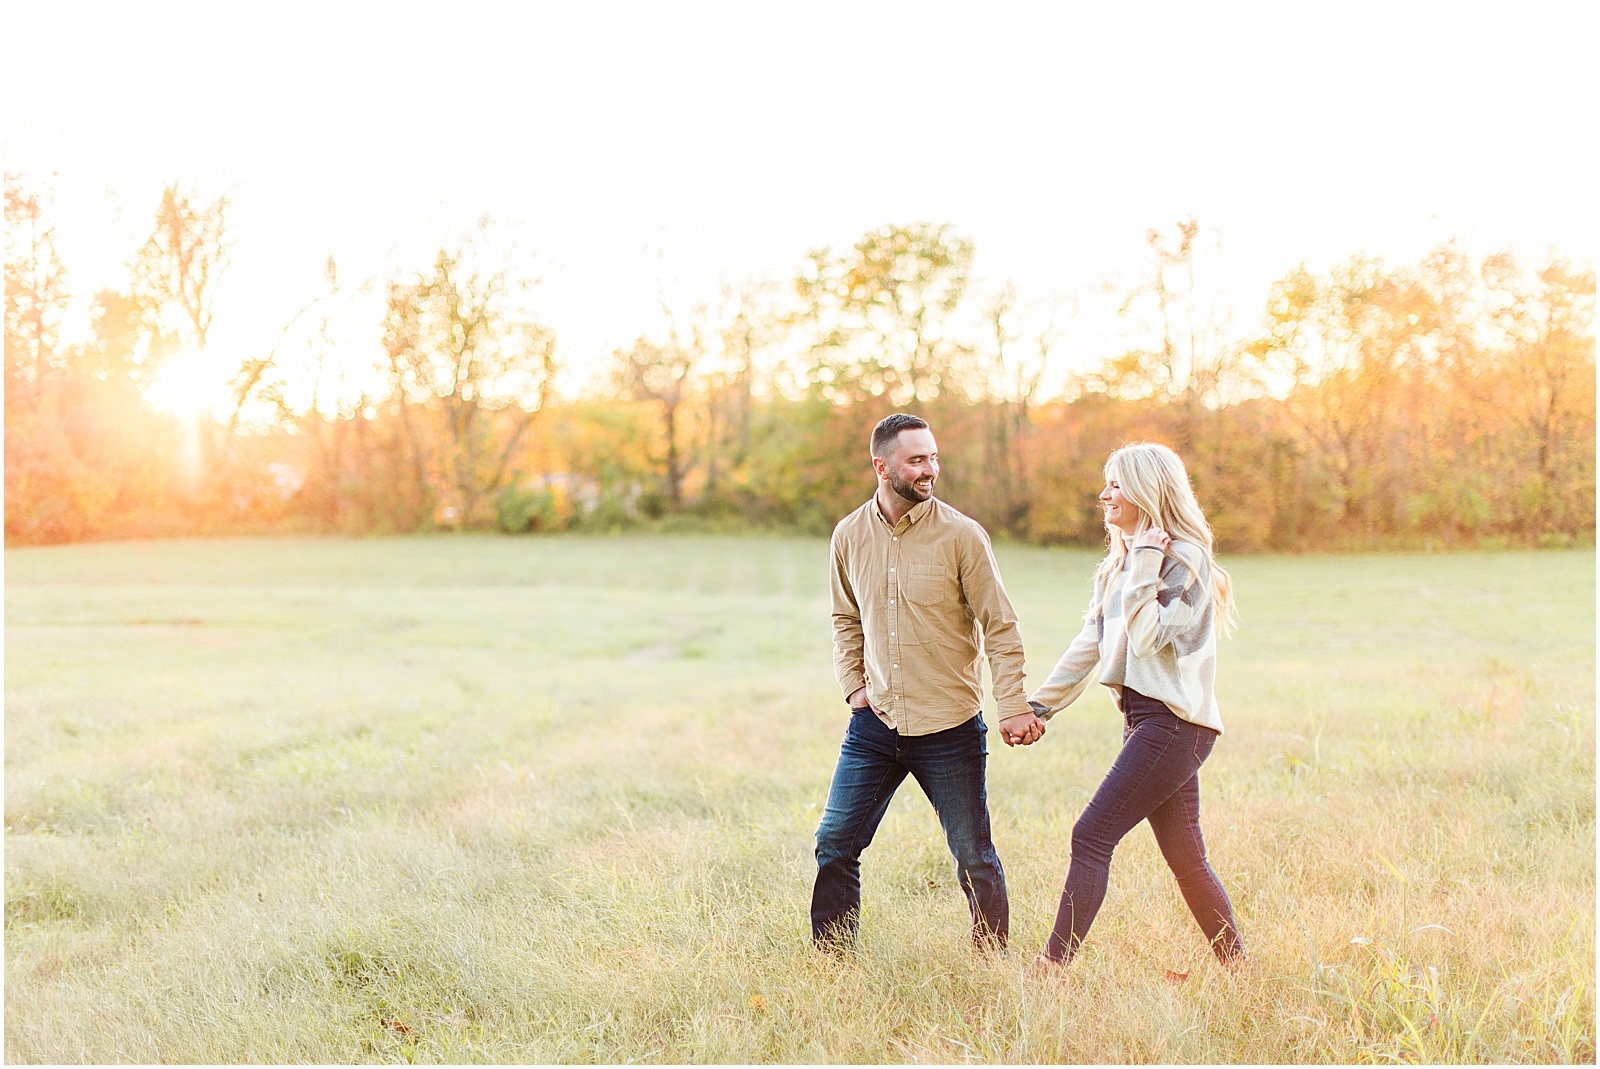 A Southern Indiana Engagement Session | Charleston and Erin | Bret and Brandie Photography045.jpg